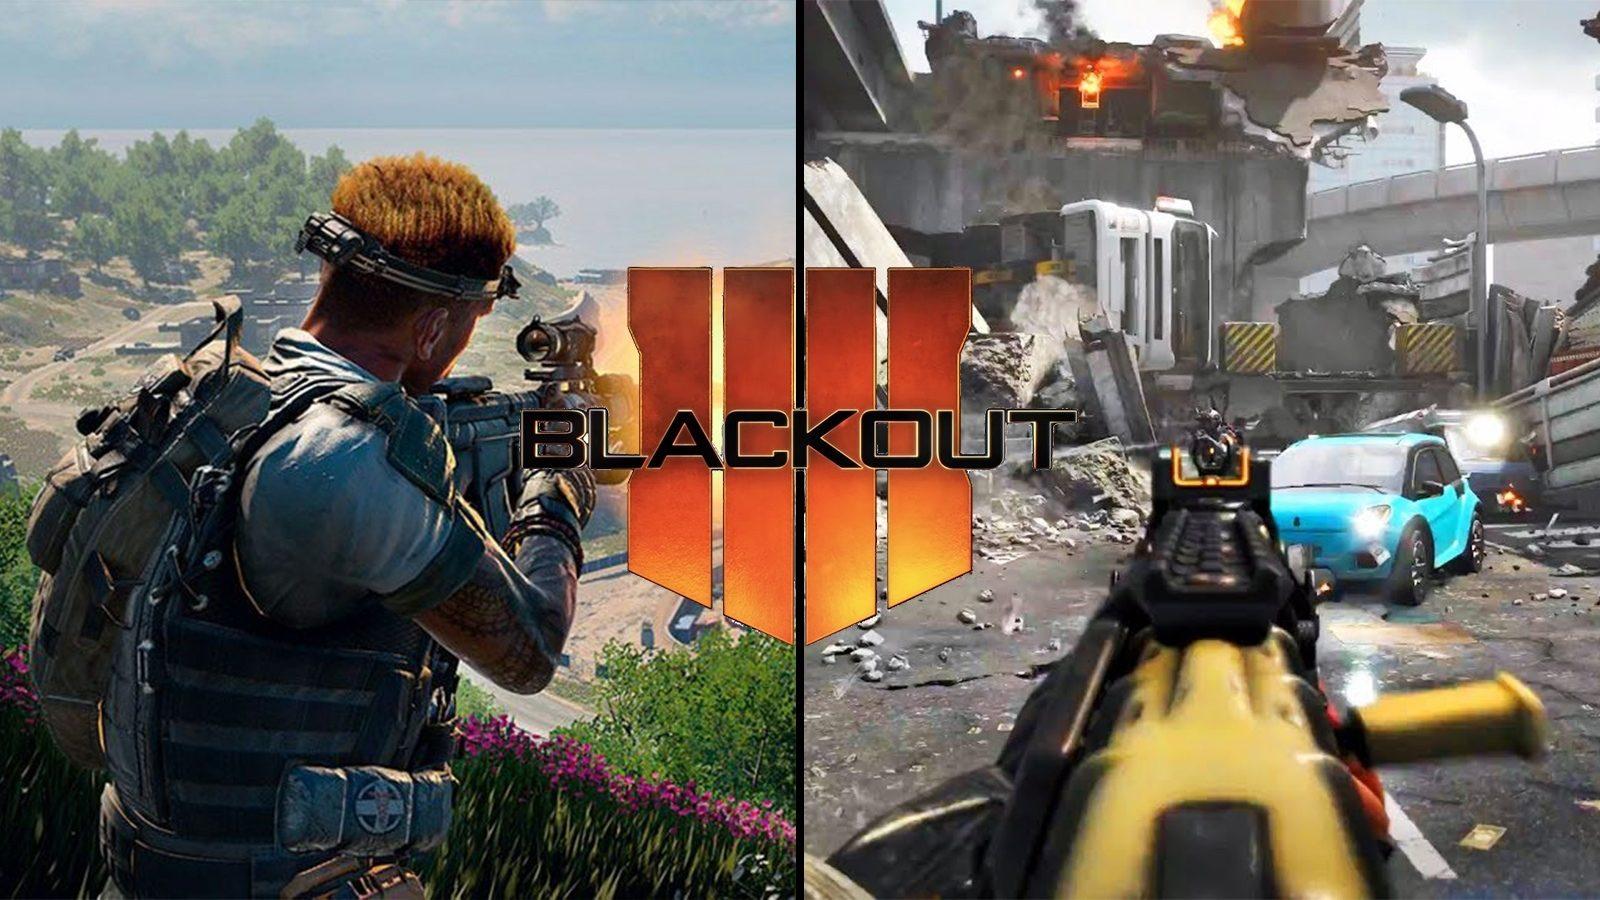 Is Black Ops 3 Zombies 4 player split screen PC?